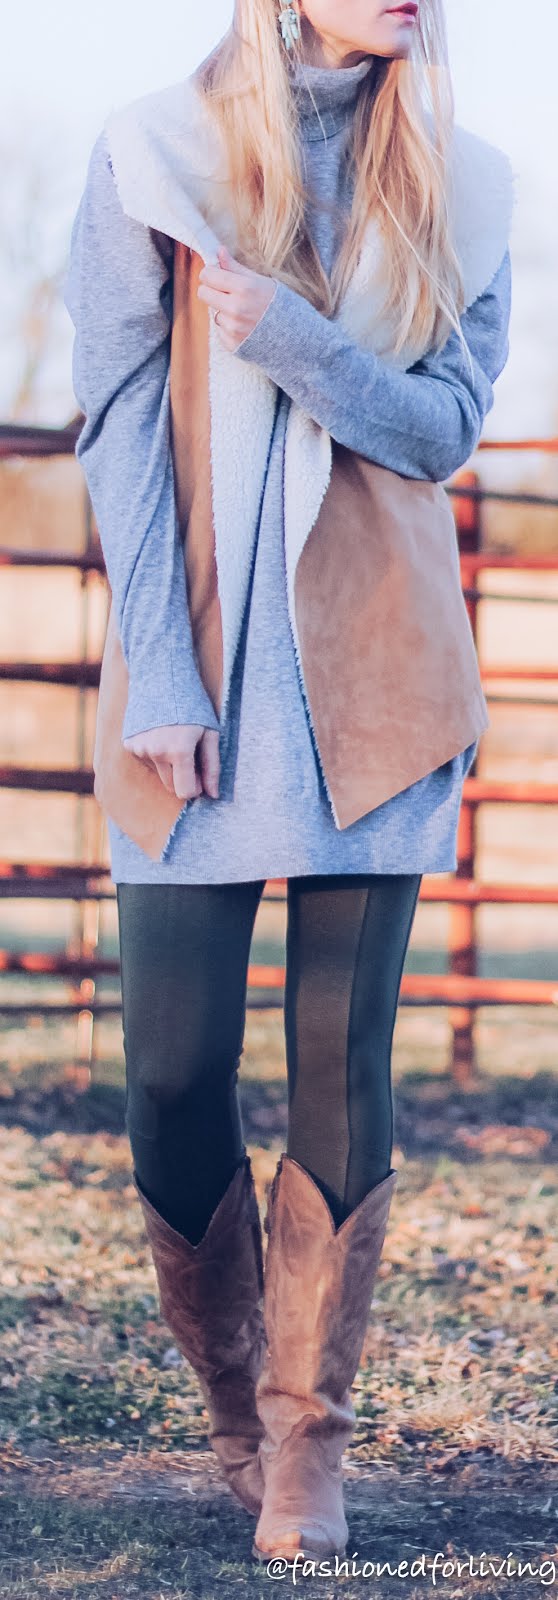 Fashioned For Living: olive green leggings outfit - sweater dress,  shearling vest and tall cowgirl boots